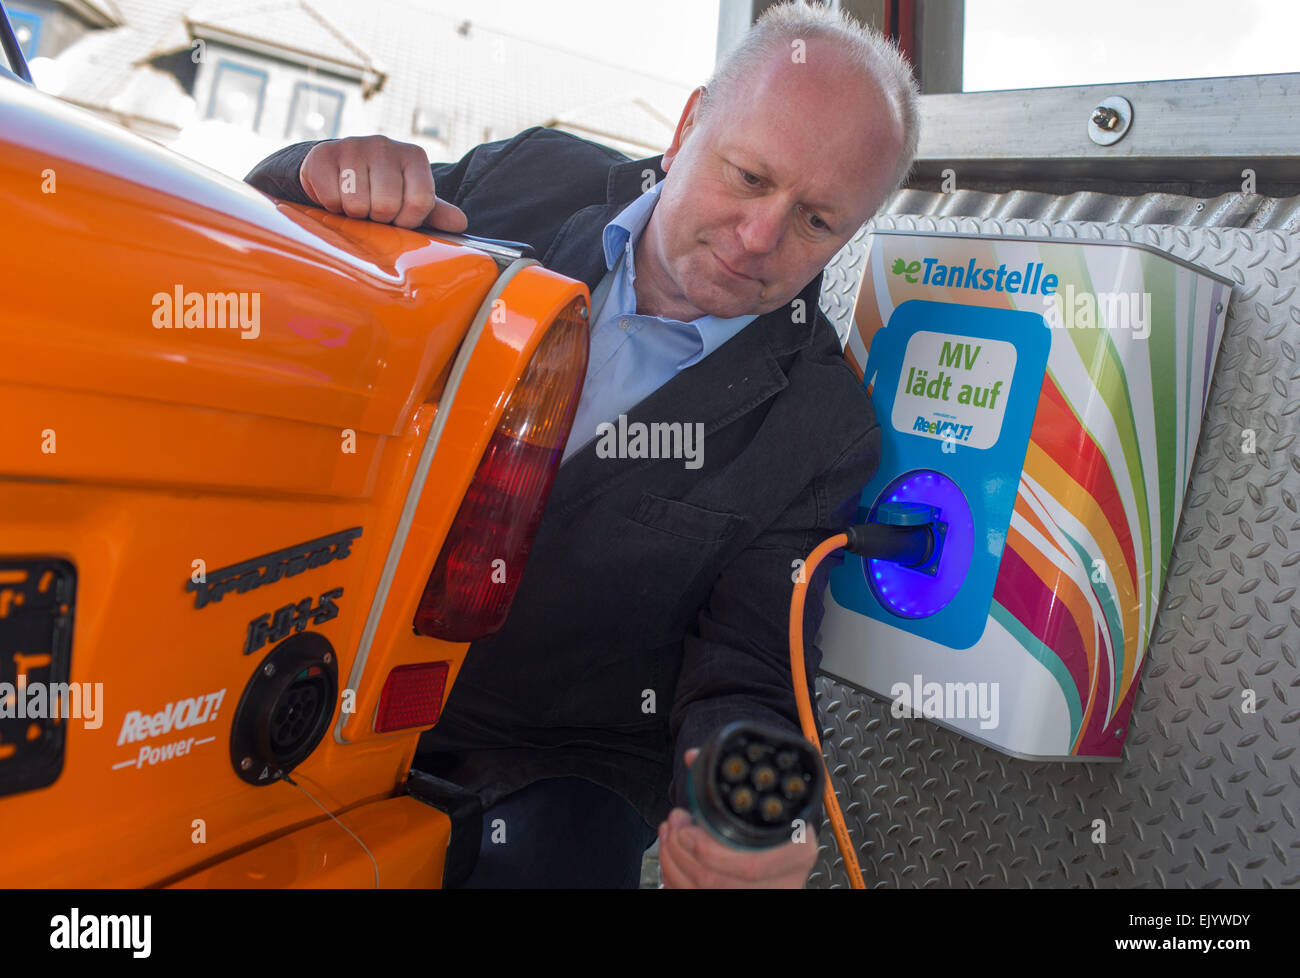 Schwerin, Germany. 12th Mar, 2015. Hans Busse plugs a cable into a Trabant (Trabi) car, which has been converted to run on electricity at a workshop in Schwerin, Germany, 12 March 2015. The E-Trabi is intended to be used for tourist safaris on the island of Ruegen in spring 2015. The firm ReeVolt converts existing vehicles to run on electricity. Photo: Jens Buettner/dpa/Alamy Live News Stock Photo